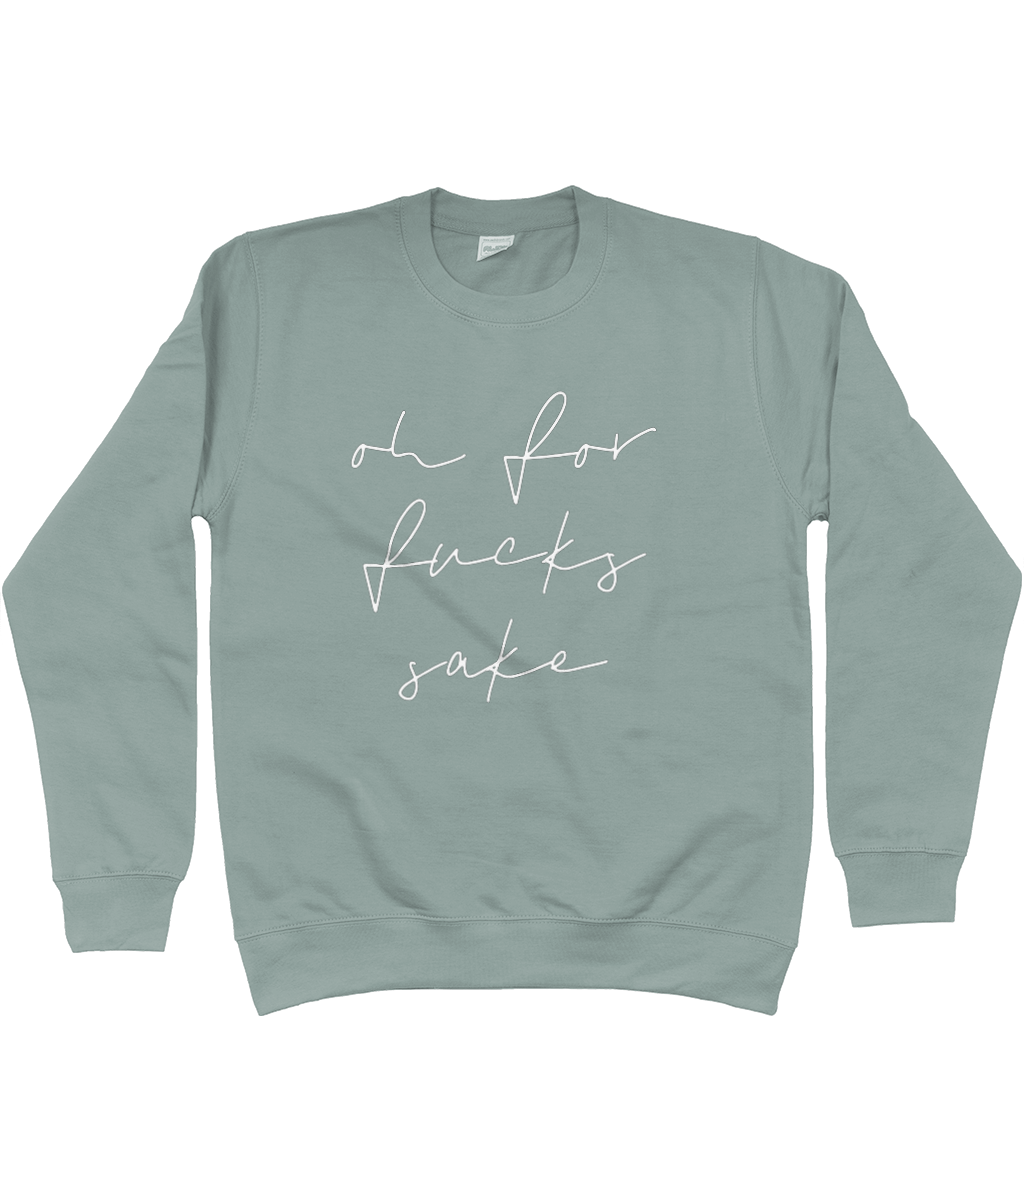 Unisex sweatshirt Oh for f***s sake various colours and sizes